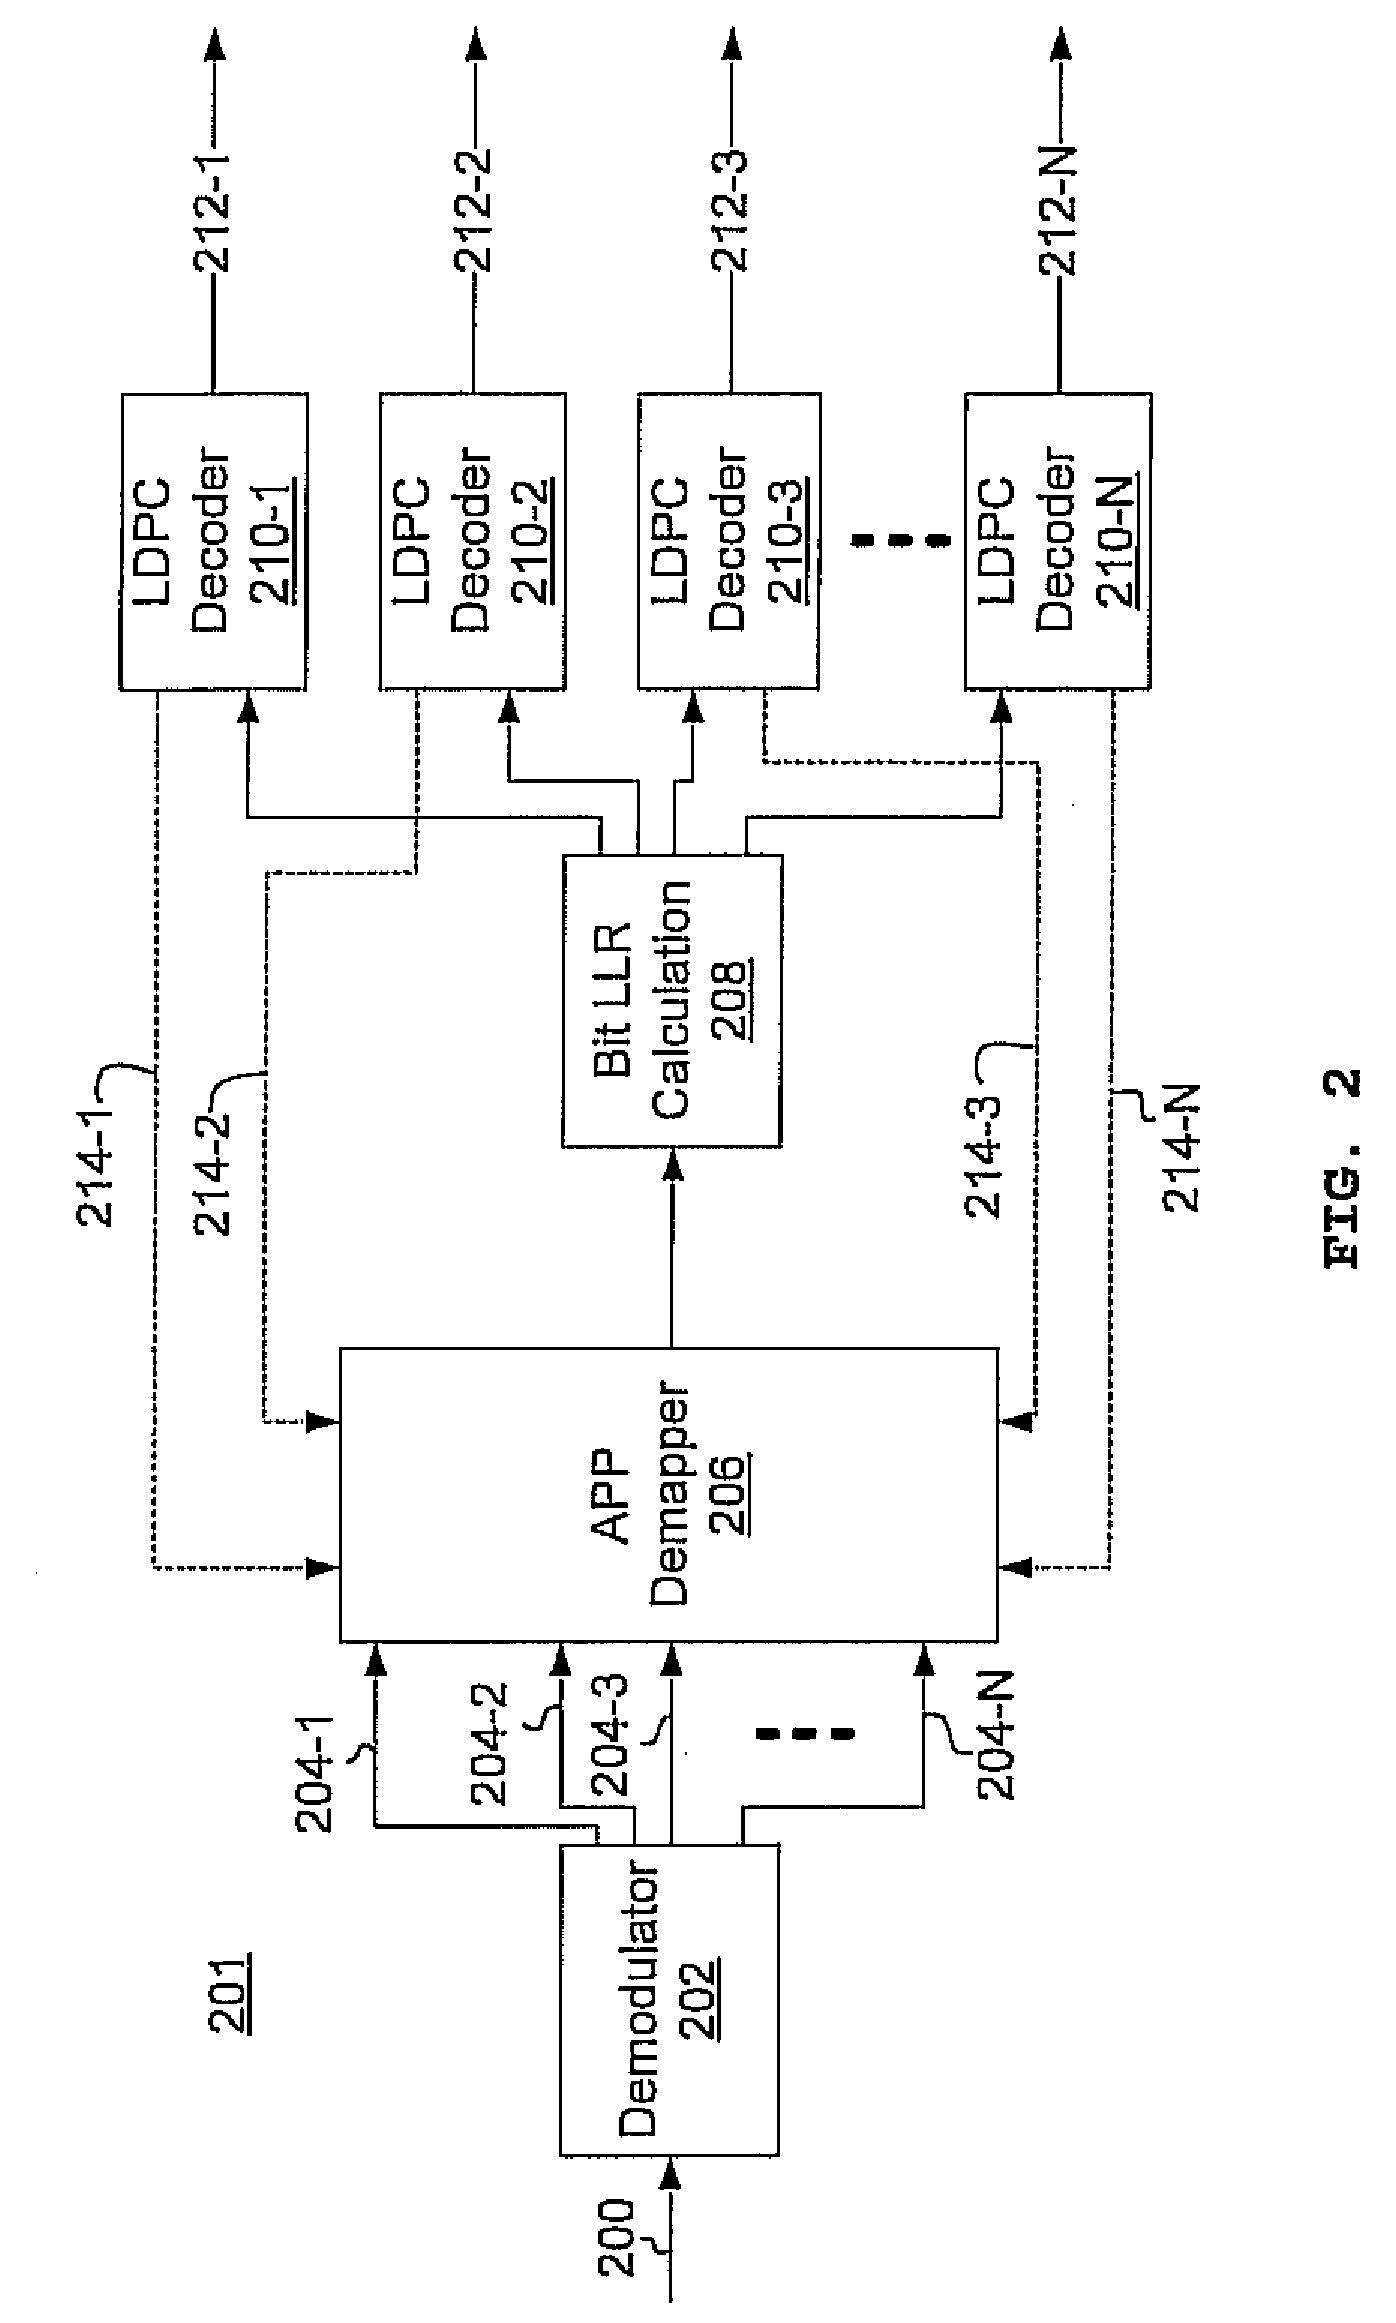 Multi-dimensional LDPC coded modulation for high-speed optical transmission systems